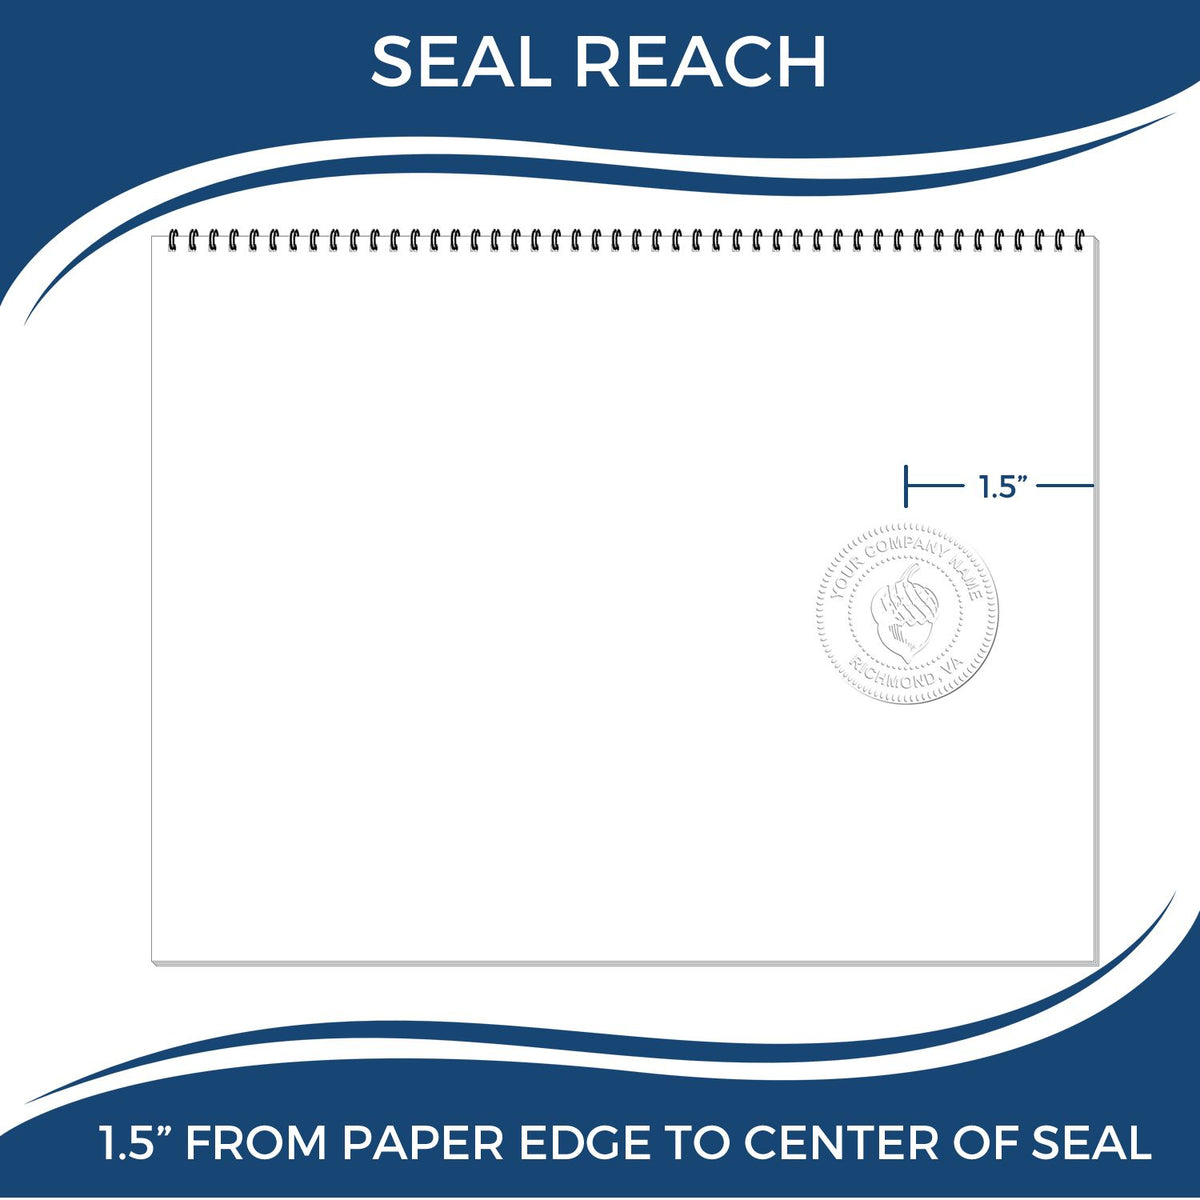 An infographic showing the seal reach which is represented by a ruler and a miniature seal image of the Hybrid Missouri Geologist Seal